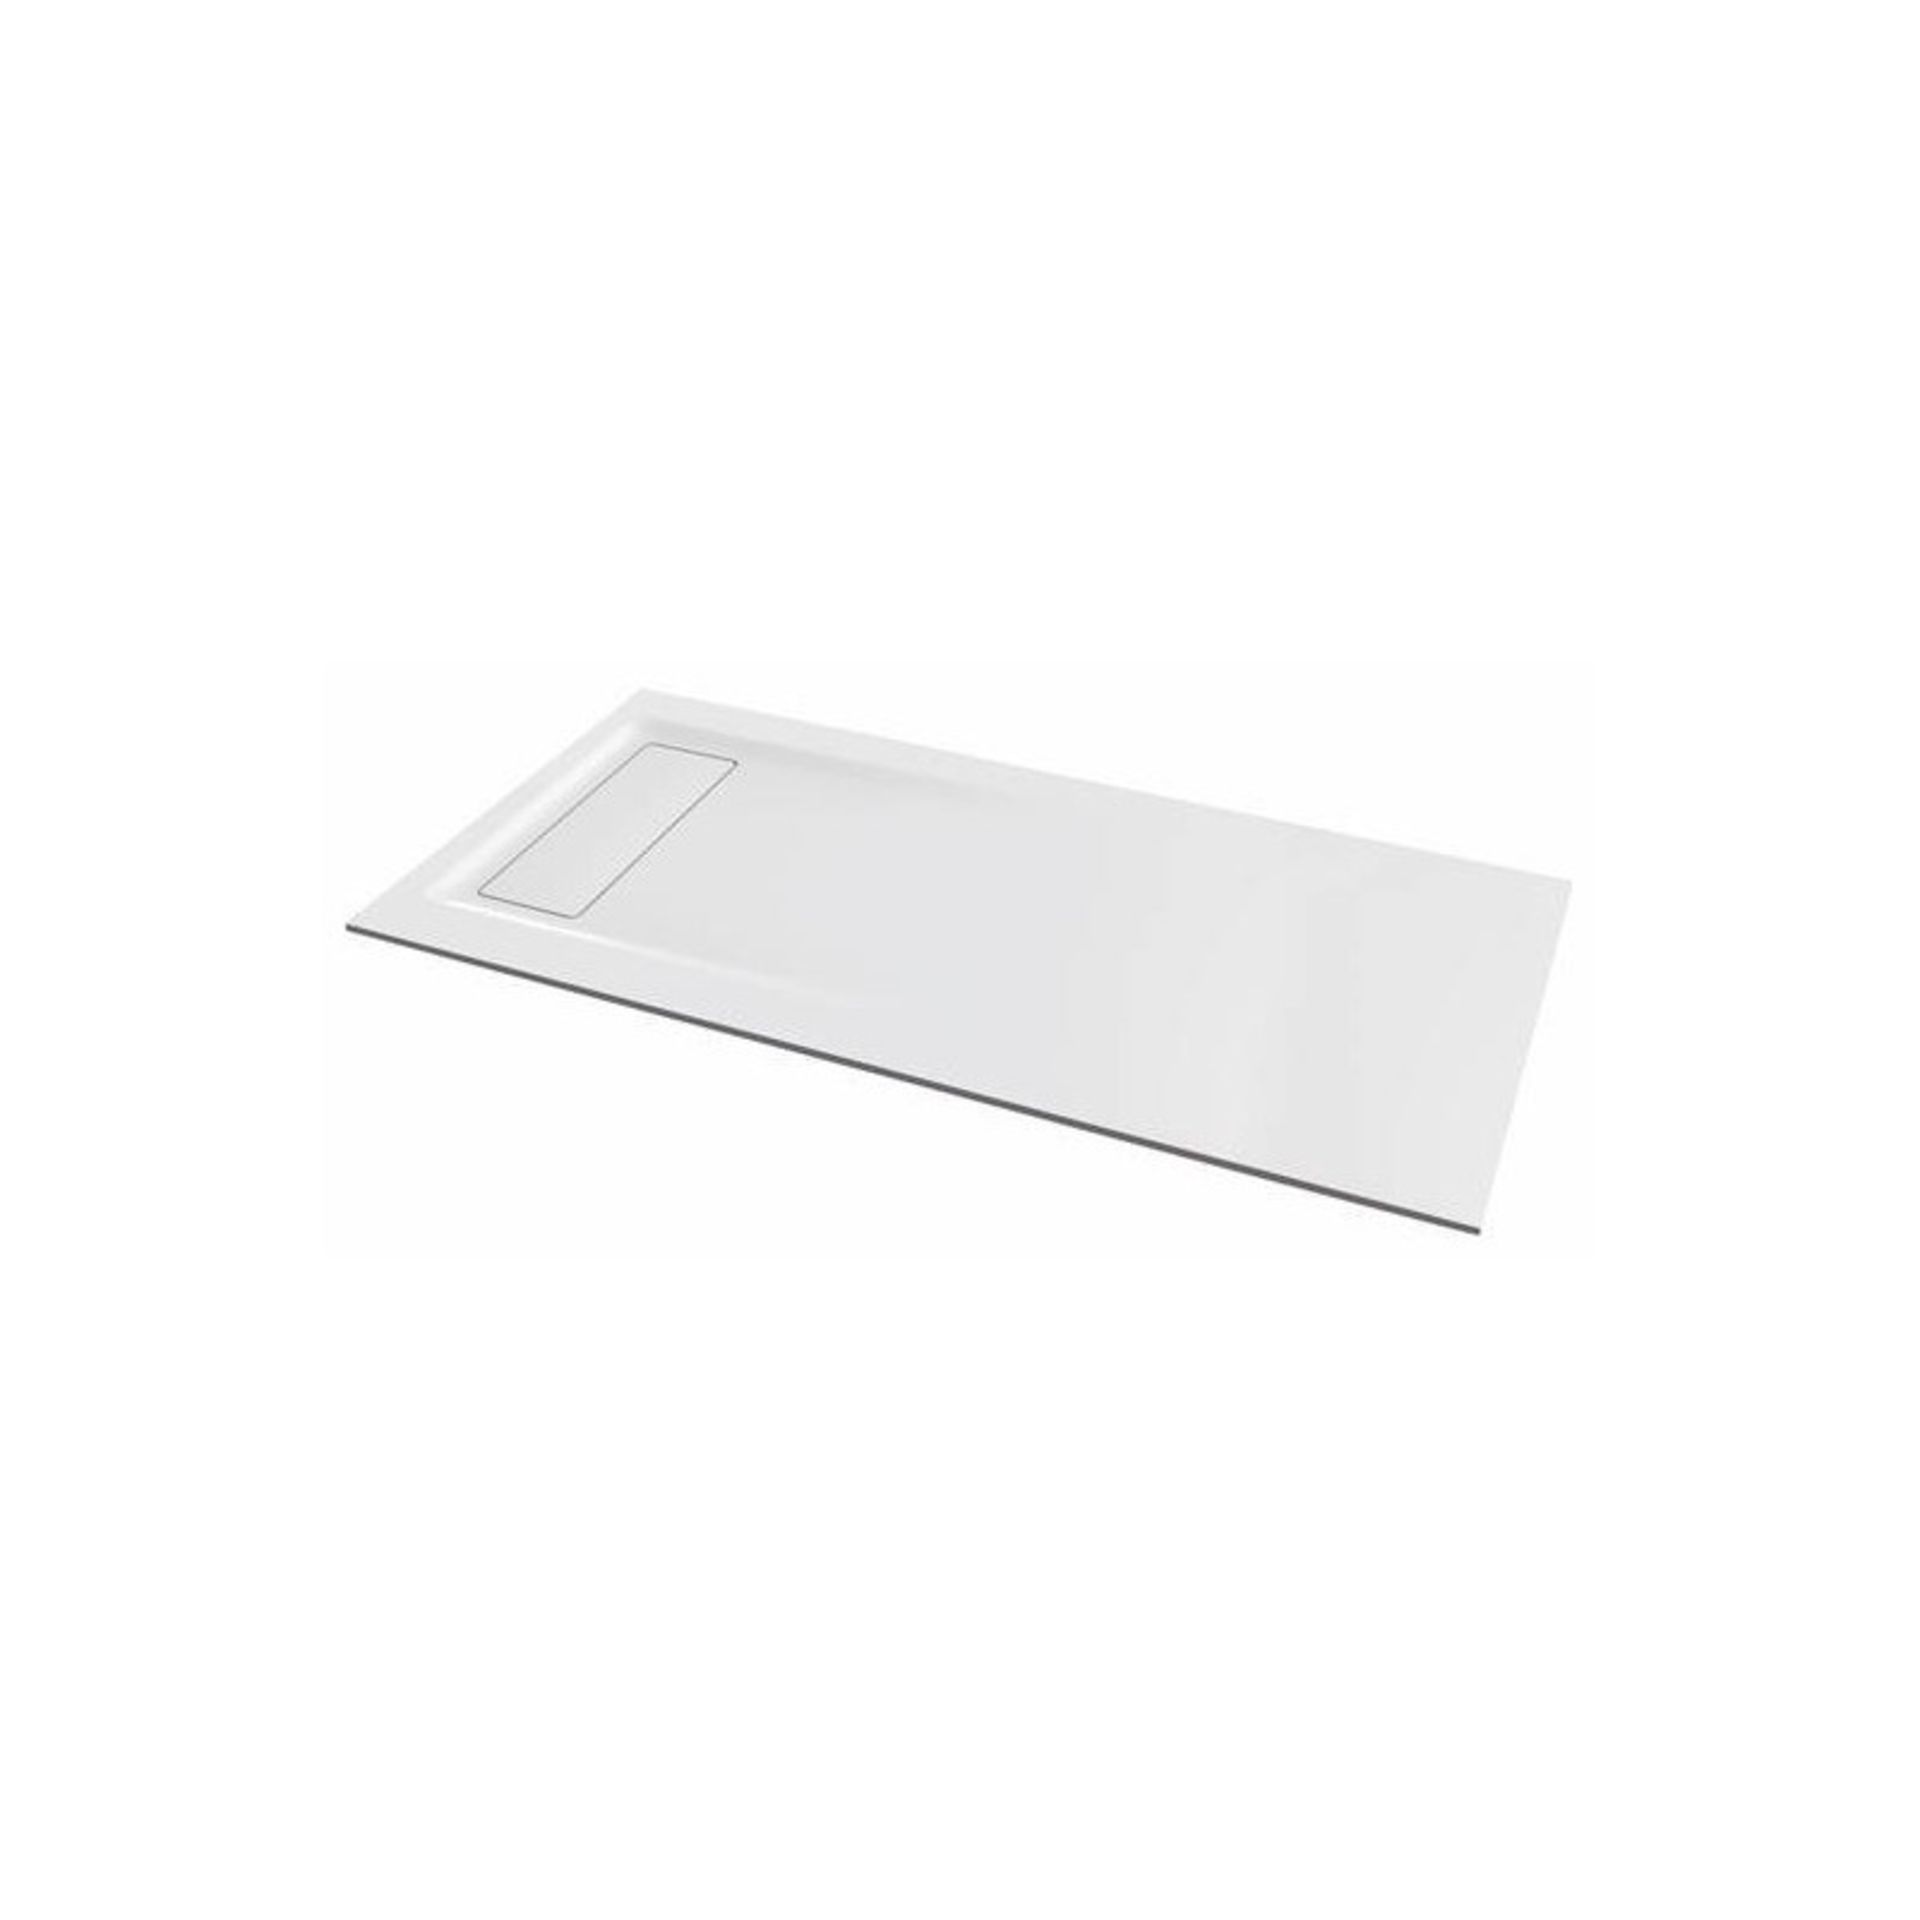 (VD145) Keramag 1600x900mm Opale White Shower Tray. RRP £1,485.99.Opale is sober, slender and... - Bild 2 aus 4